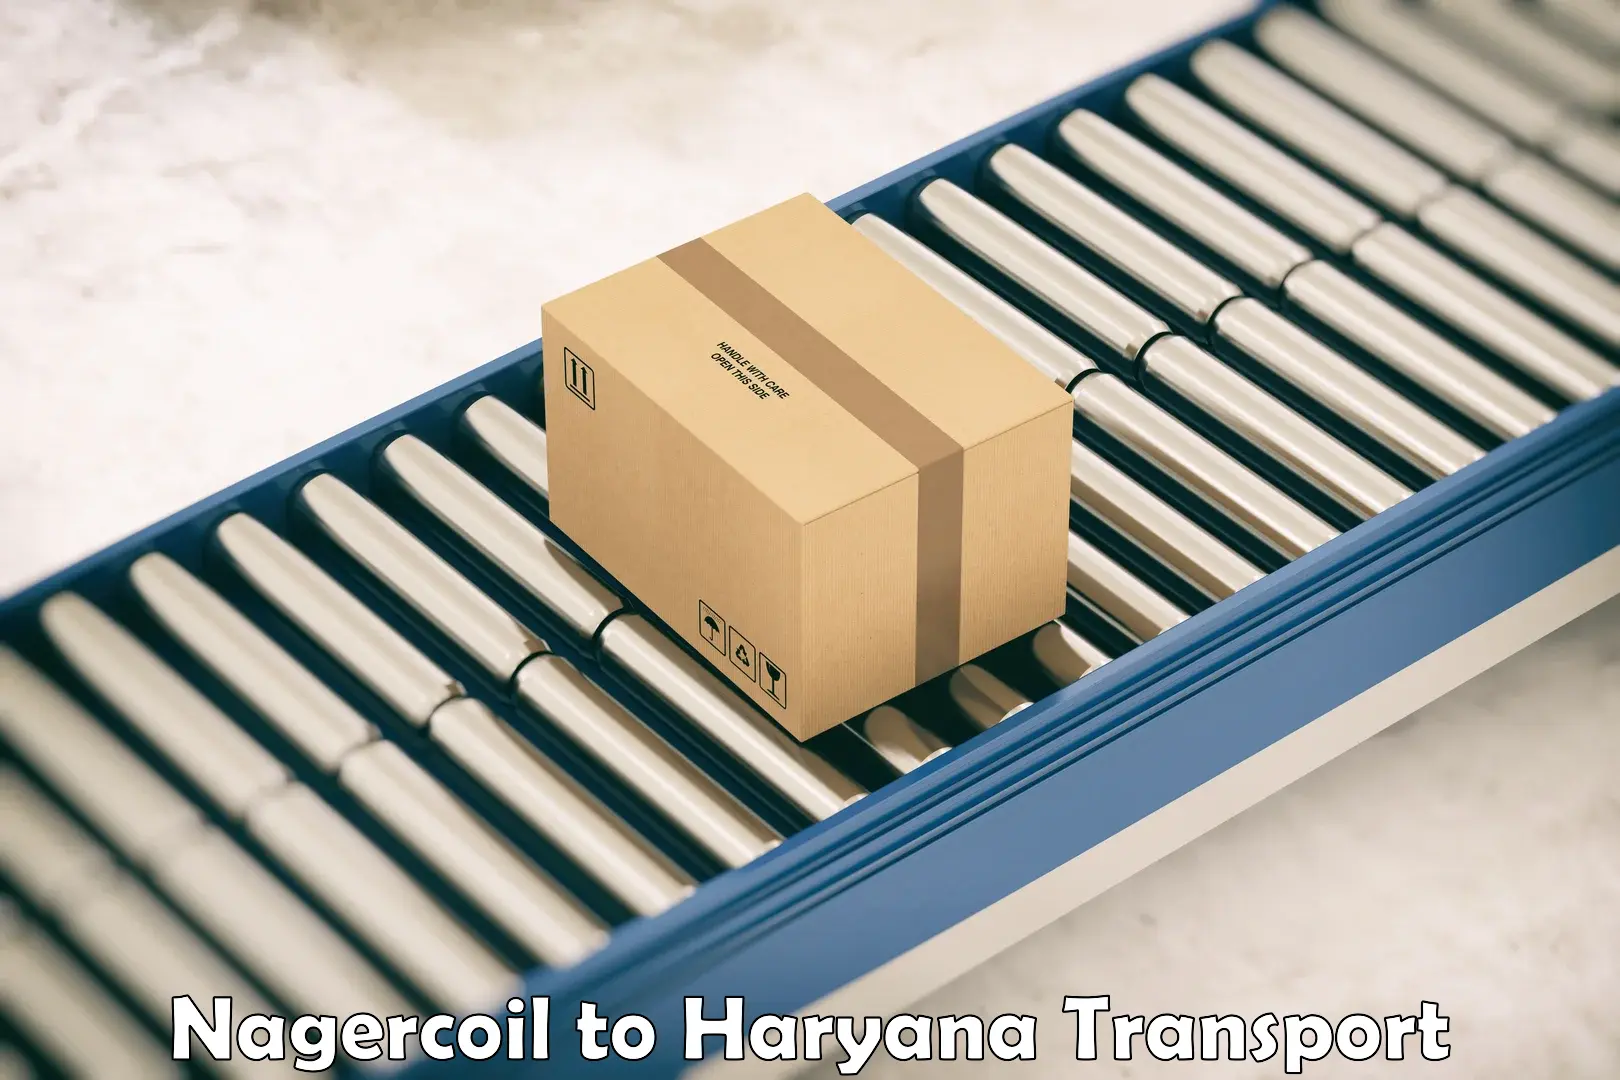 Truck transport companies in India Nagercoil to Hansi